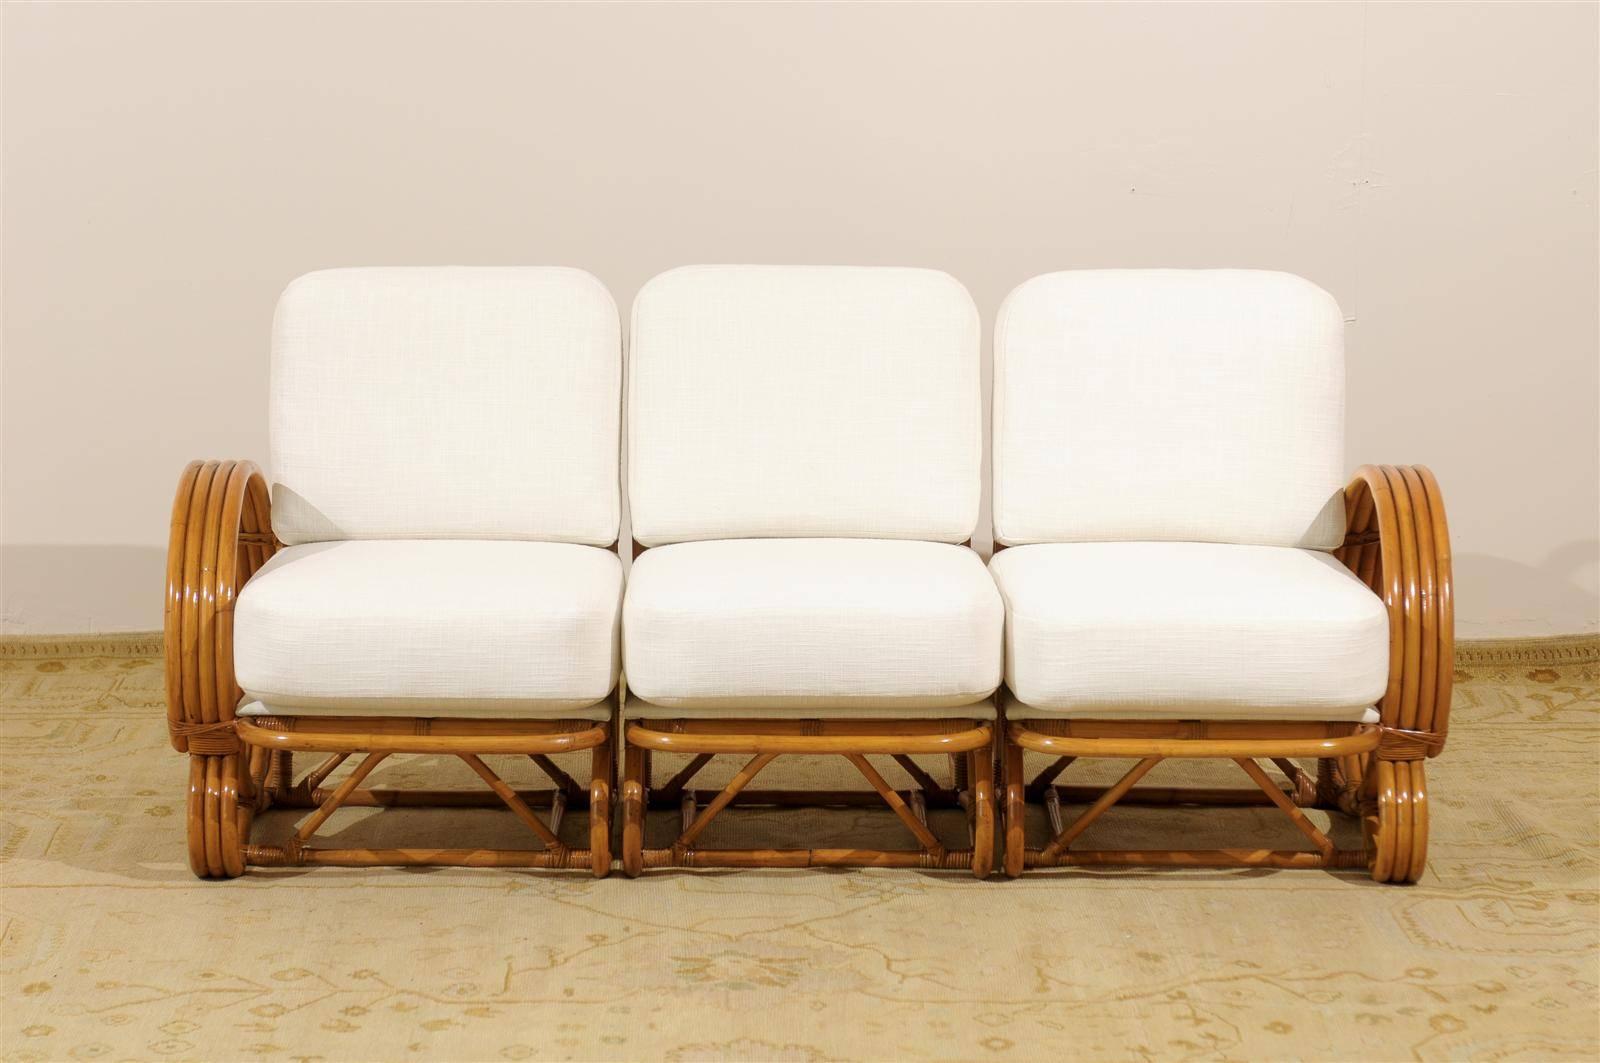 An exceptional, highly unusual vintage rattan four (4) band sofa, circa 1940. The skill and craftsmanship required to produce this curvilinear design is significantly greater than that of the typical 